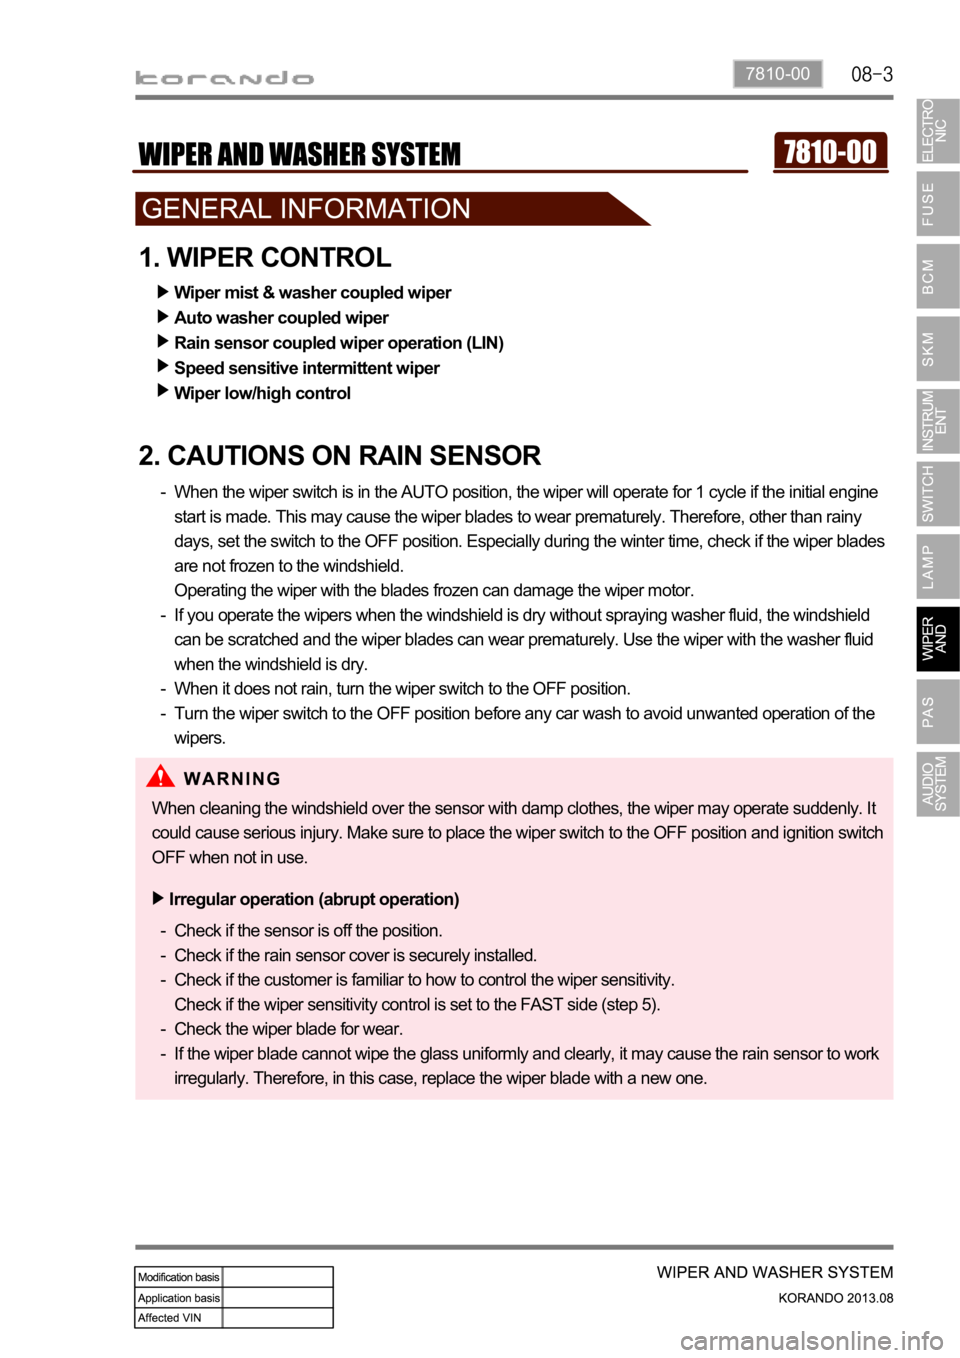 SSANGYONG KORANDO 2013  Service Manual 7810-00
1. WIPER CONTROL
2. CAUTIONS ON RAIN SENSOR
When the wiper switch is in the AUTO position, the wiper will operate for 1 cycle if the initial engine 
start is made. This may cause the wiper bla